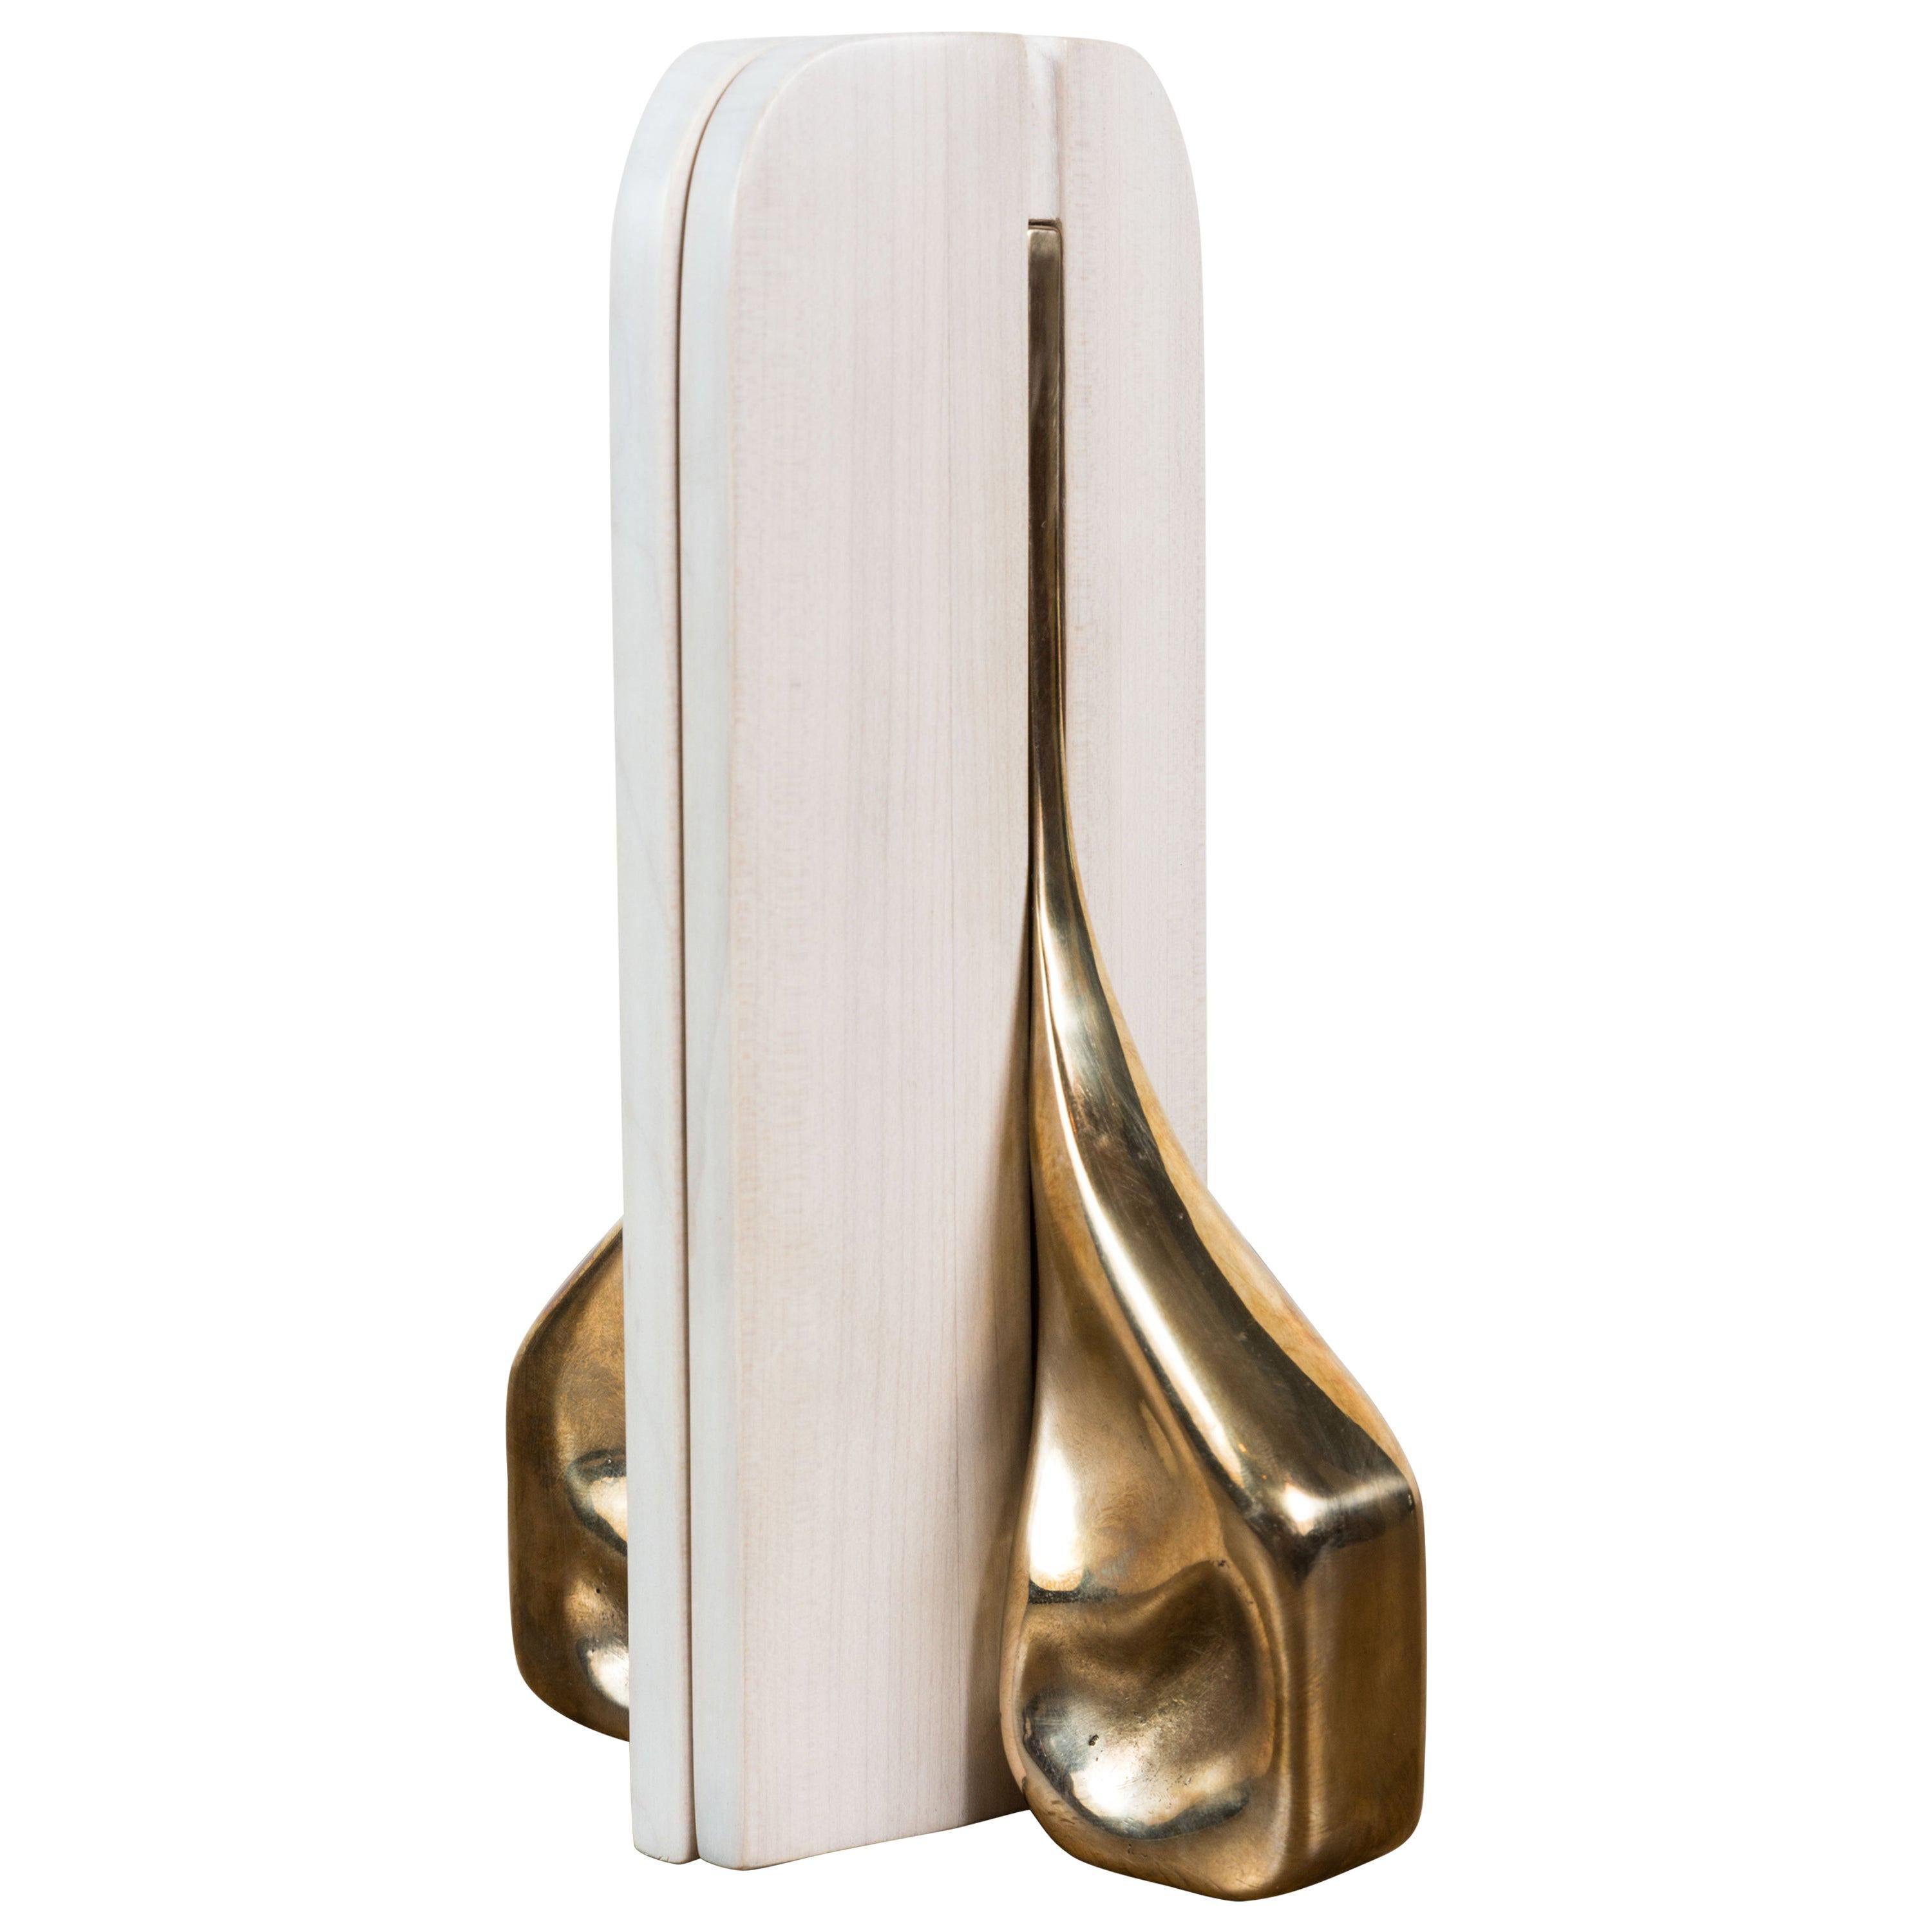 Pair of White Maple and Cast Bronze Bookends by Vincent Pocsik, In Stock